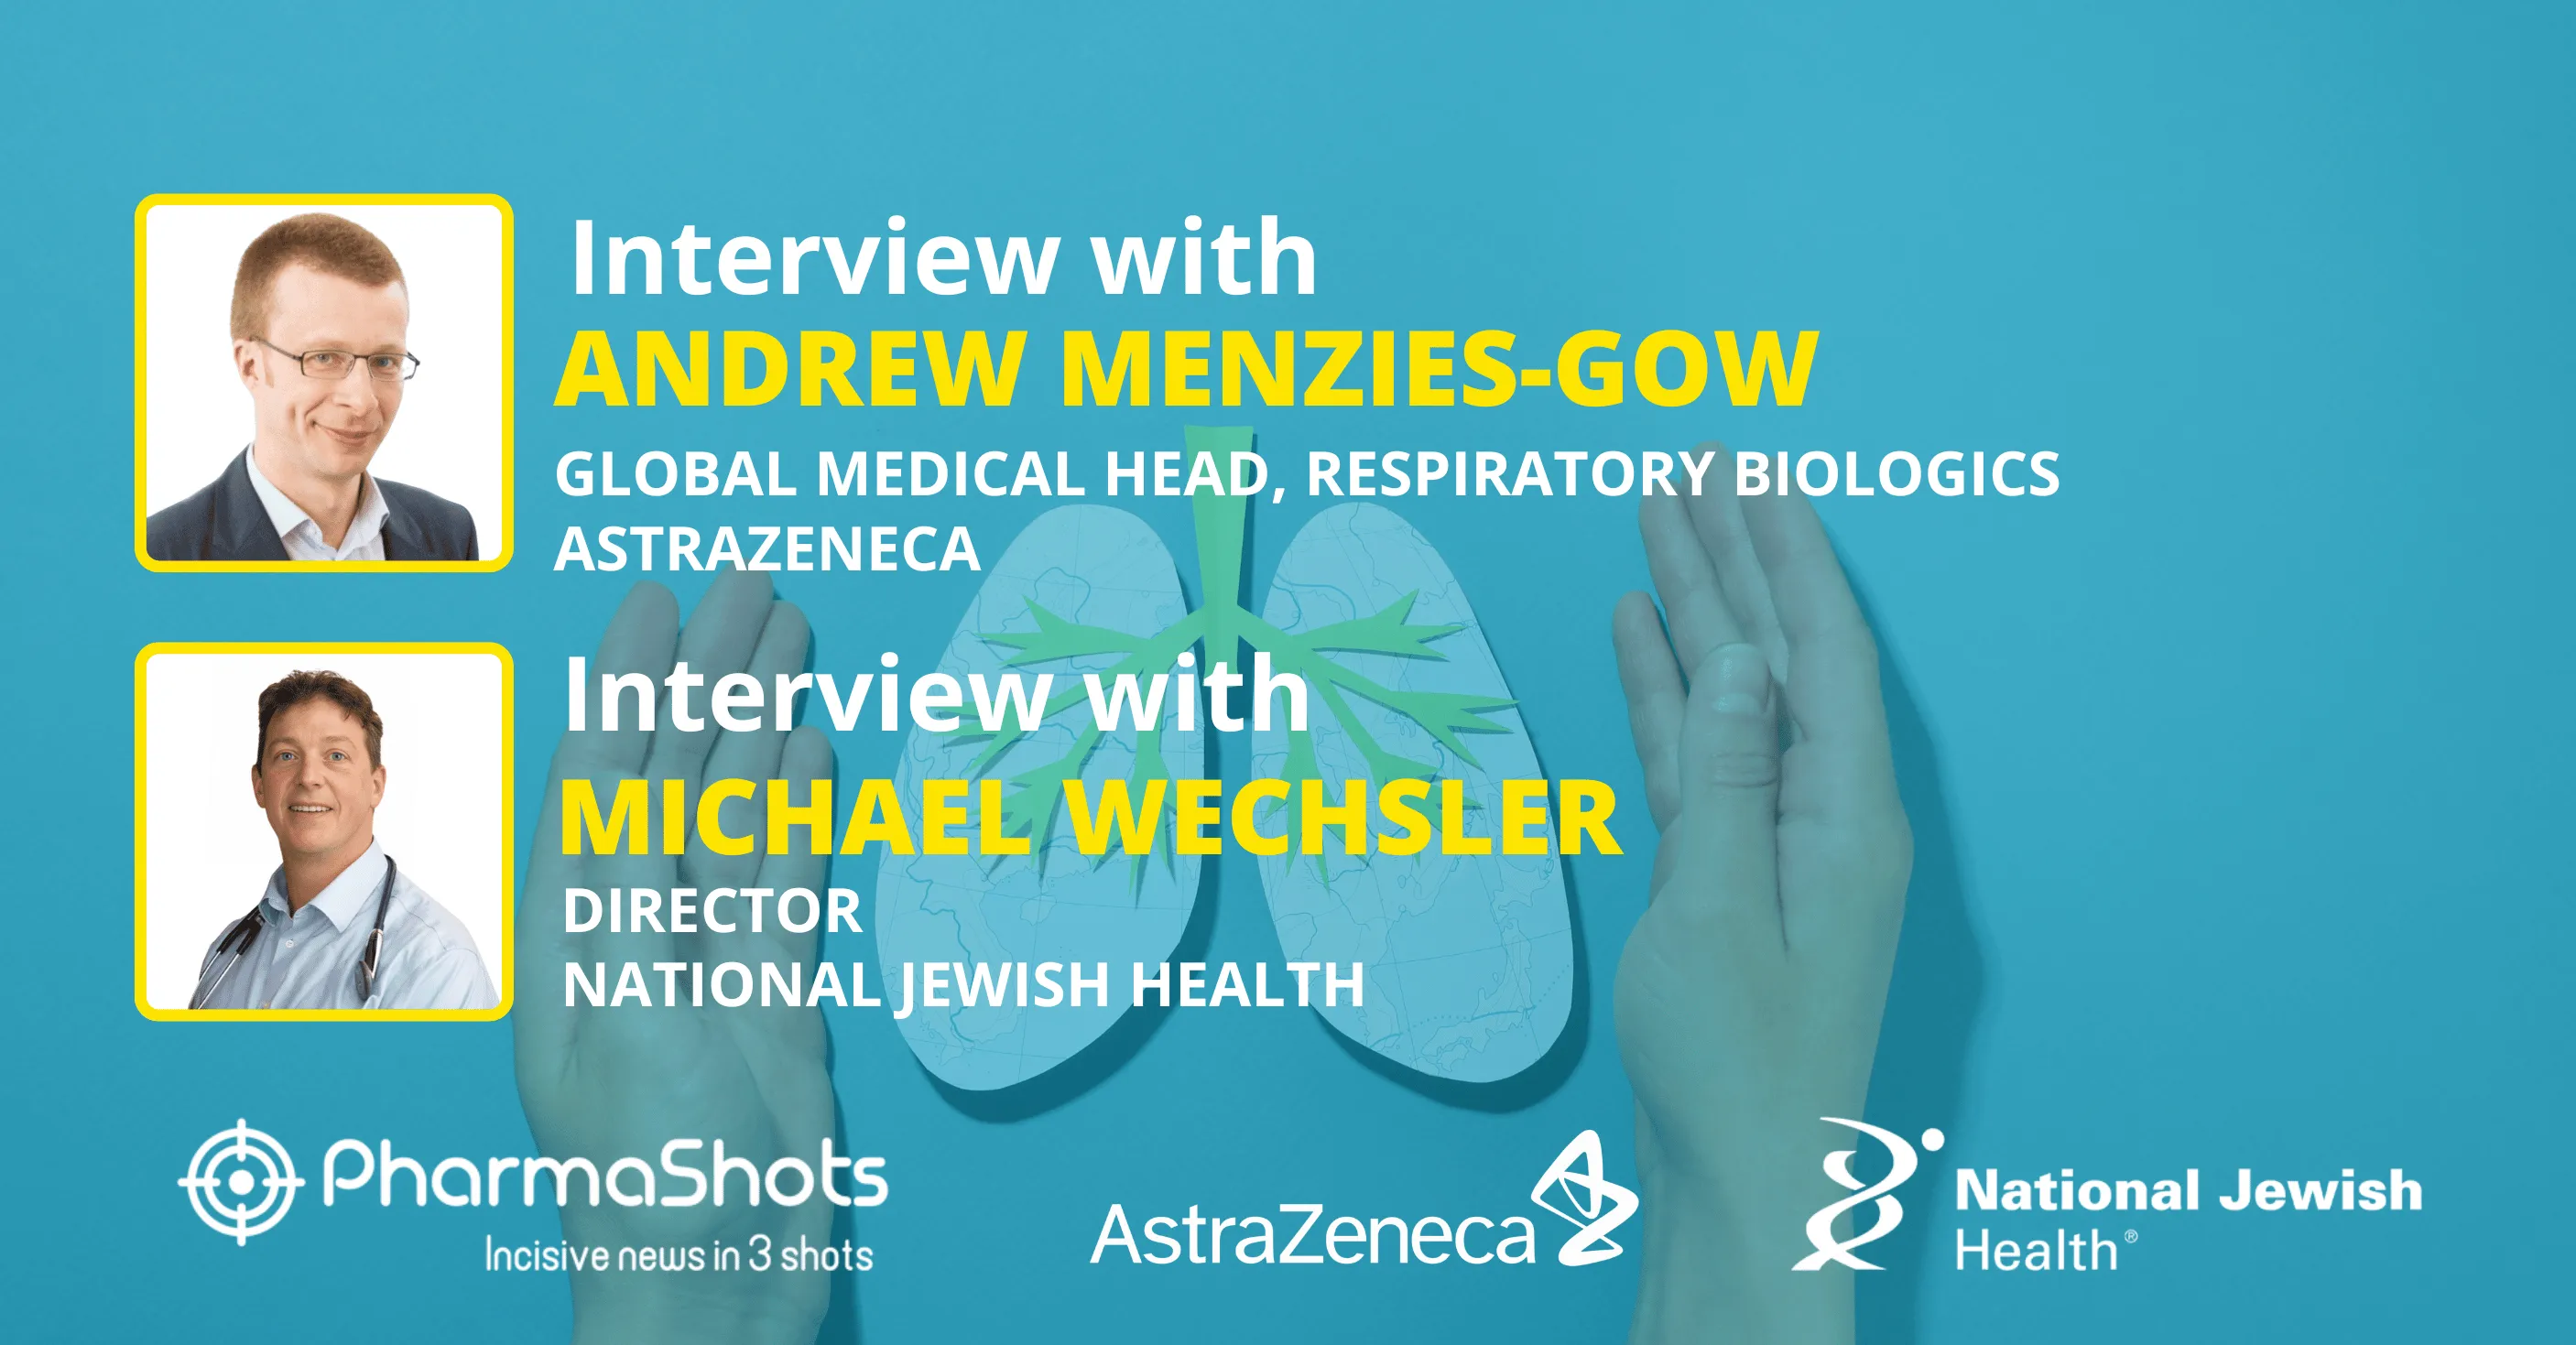 EGPA Remission with Fasenra: Michael Wechsler and Andrew Menzies Gow in Conversation with PharmaShots